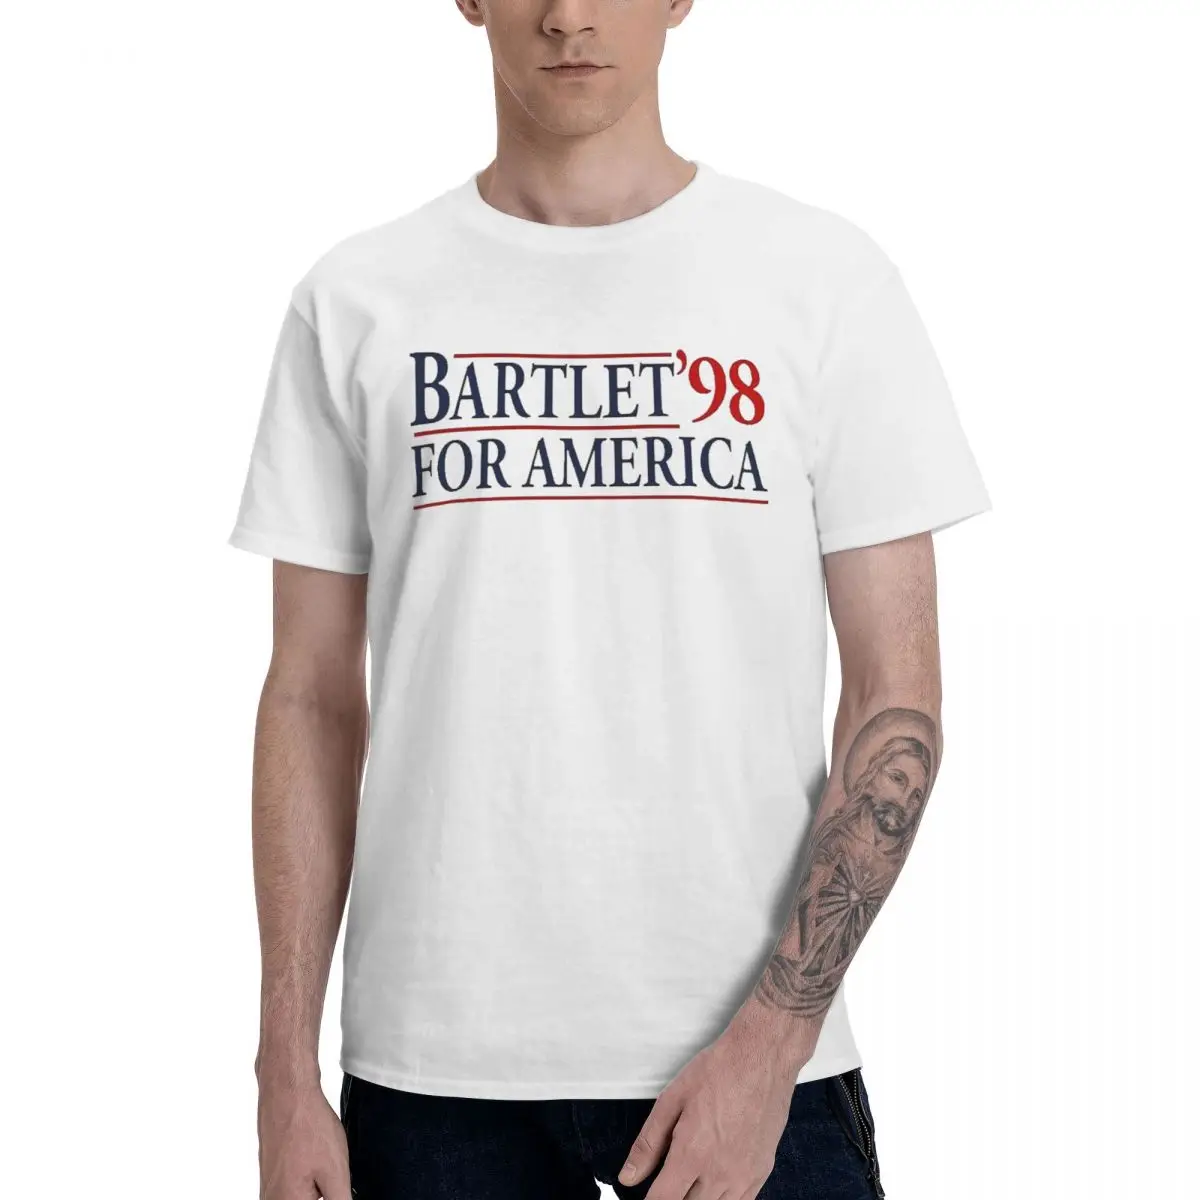 

Fashion West Wing Bartlet For America 1998 T-Shirts Pure Cotton Round Neck Male T Shirt Short Sleeve Oversized Gift Tees Tops